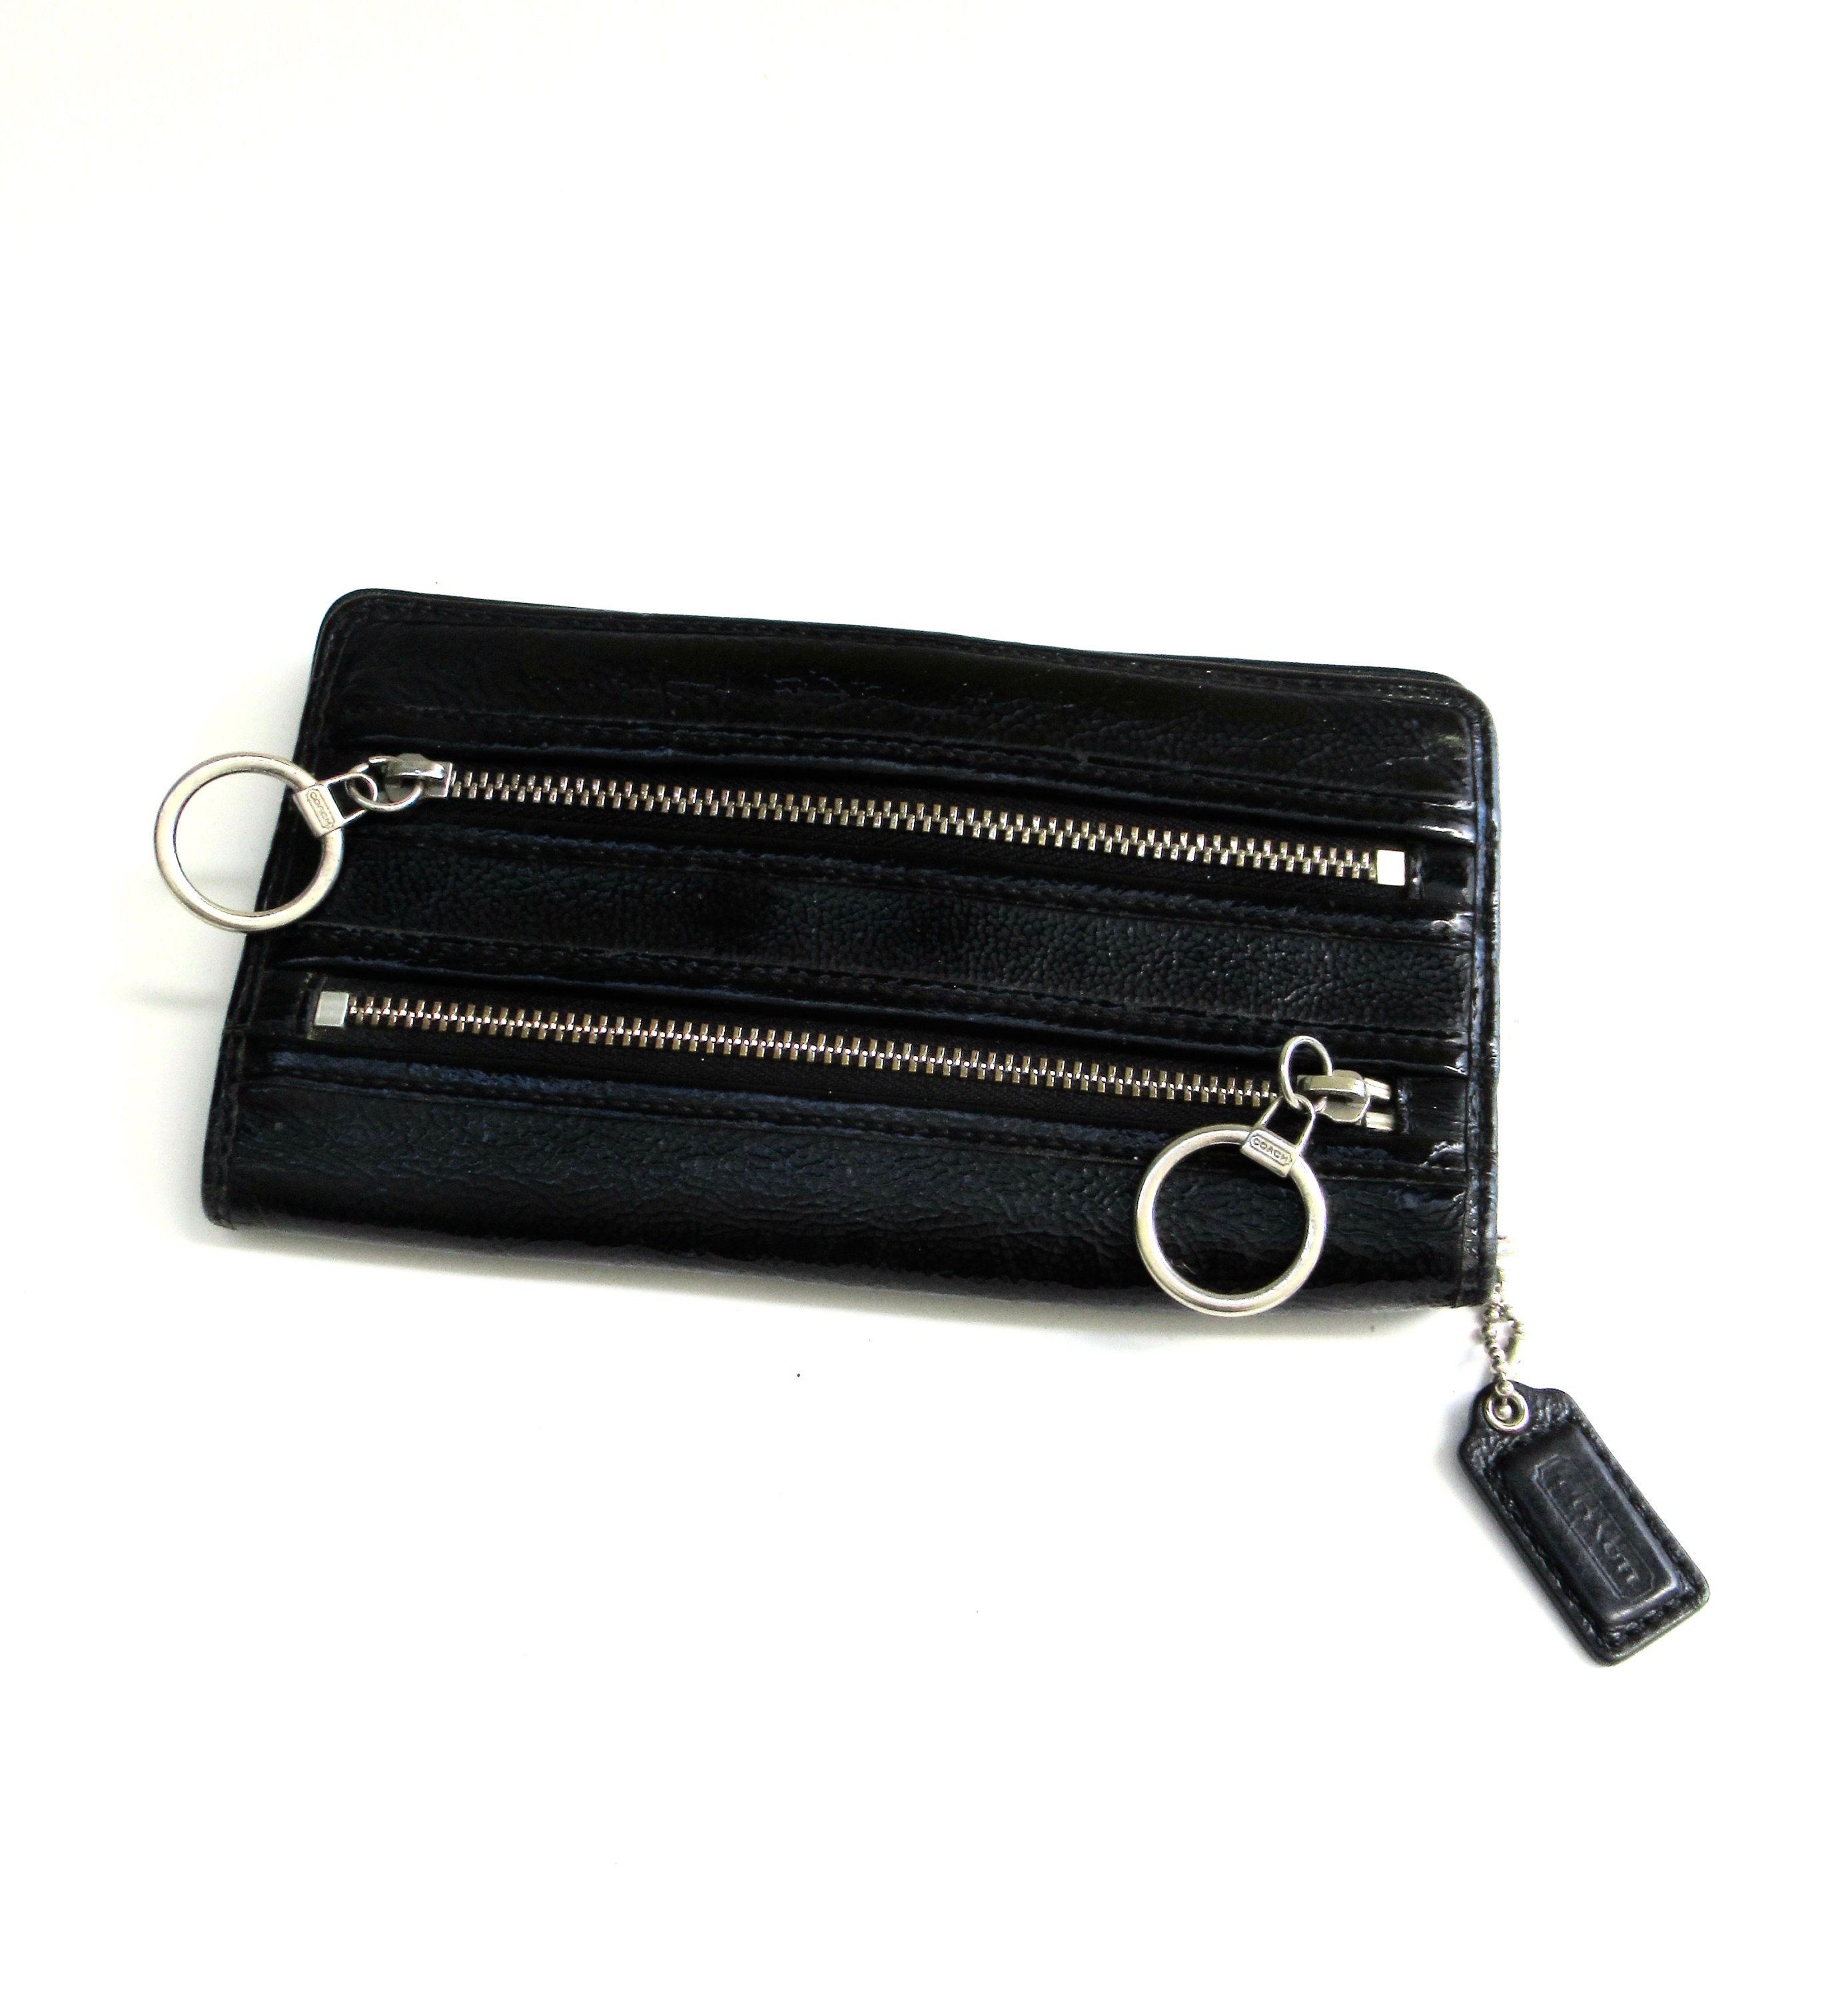 NEW Coach Black Pebbled Leather Zippered Multifunction Card Case Wallet NWT